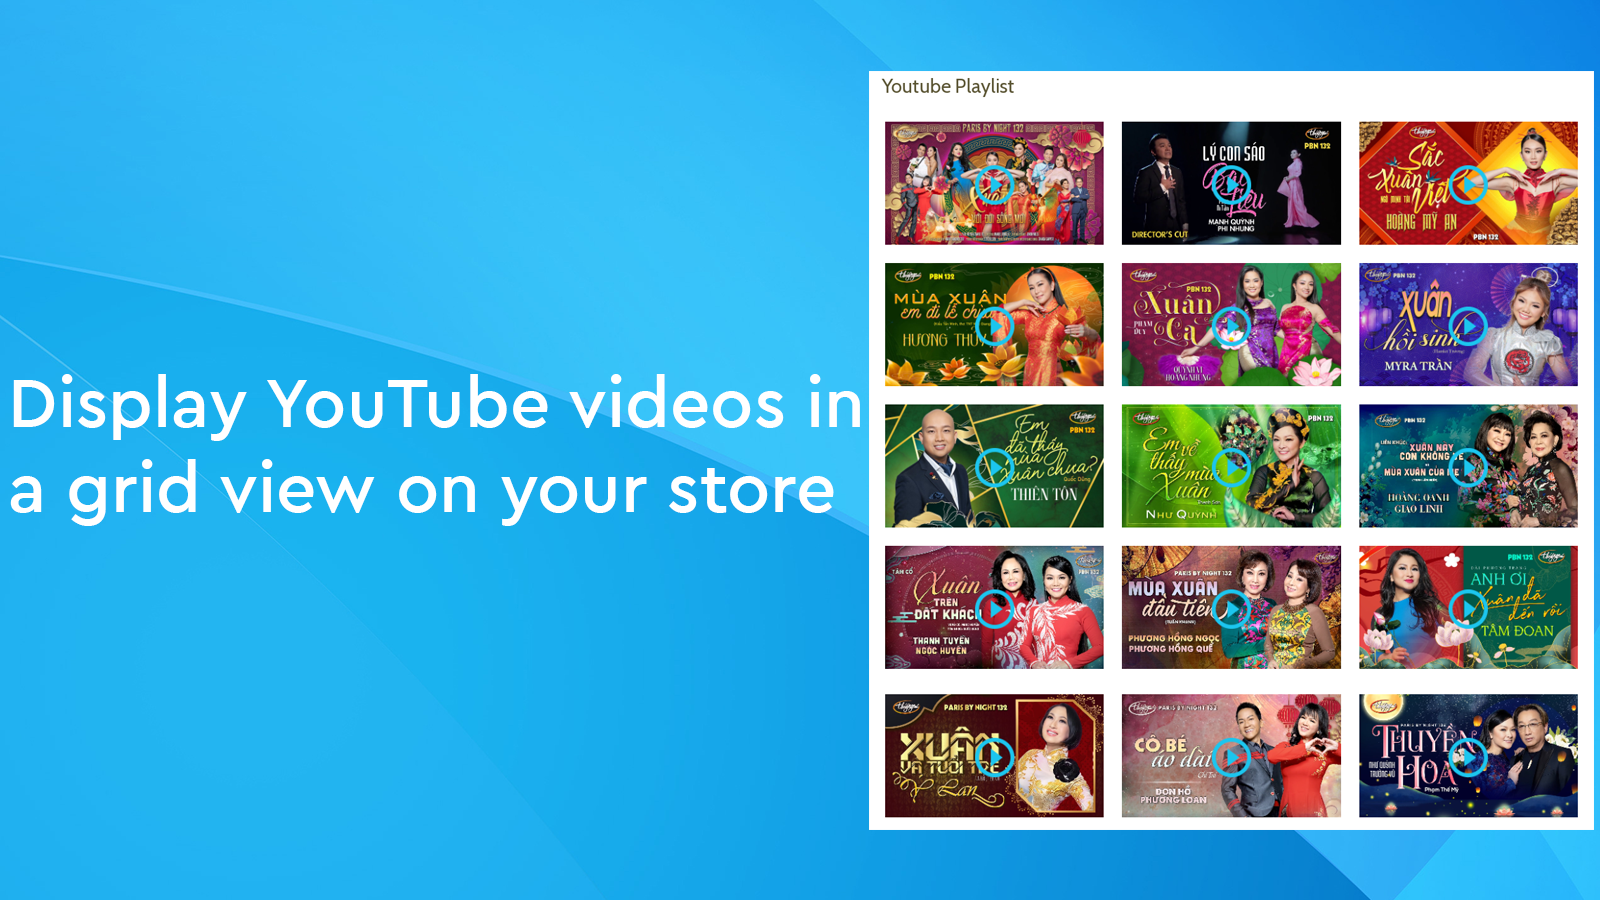 Display YouTube videos in a grid view on your store